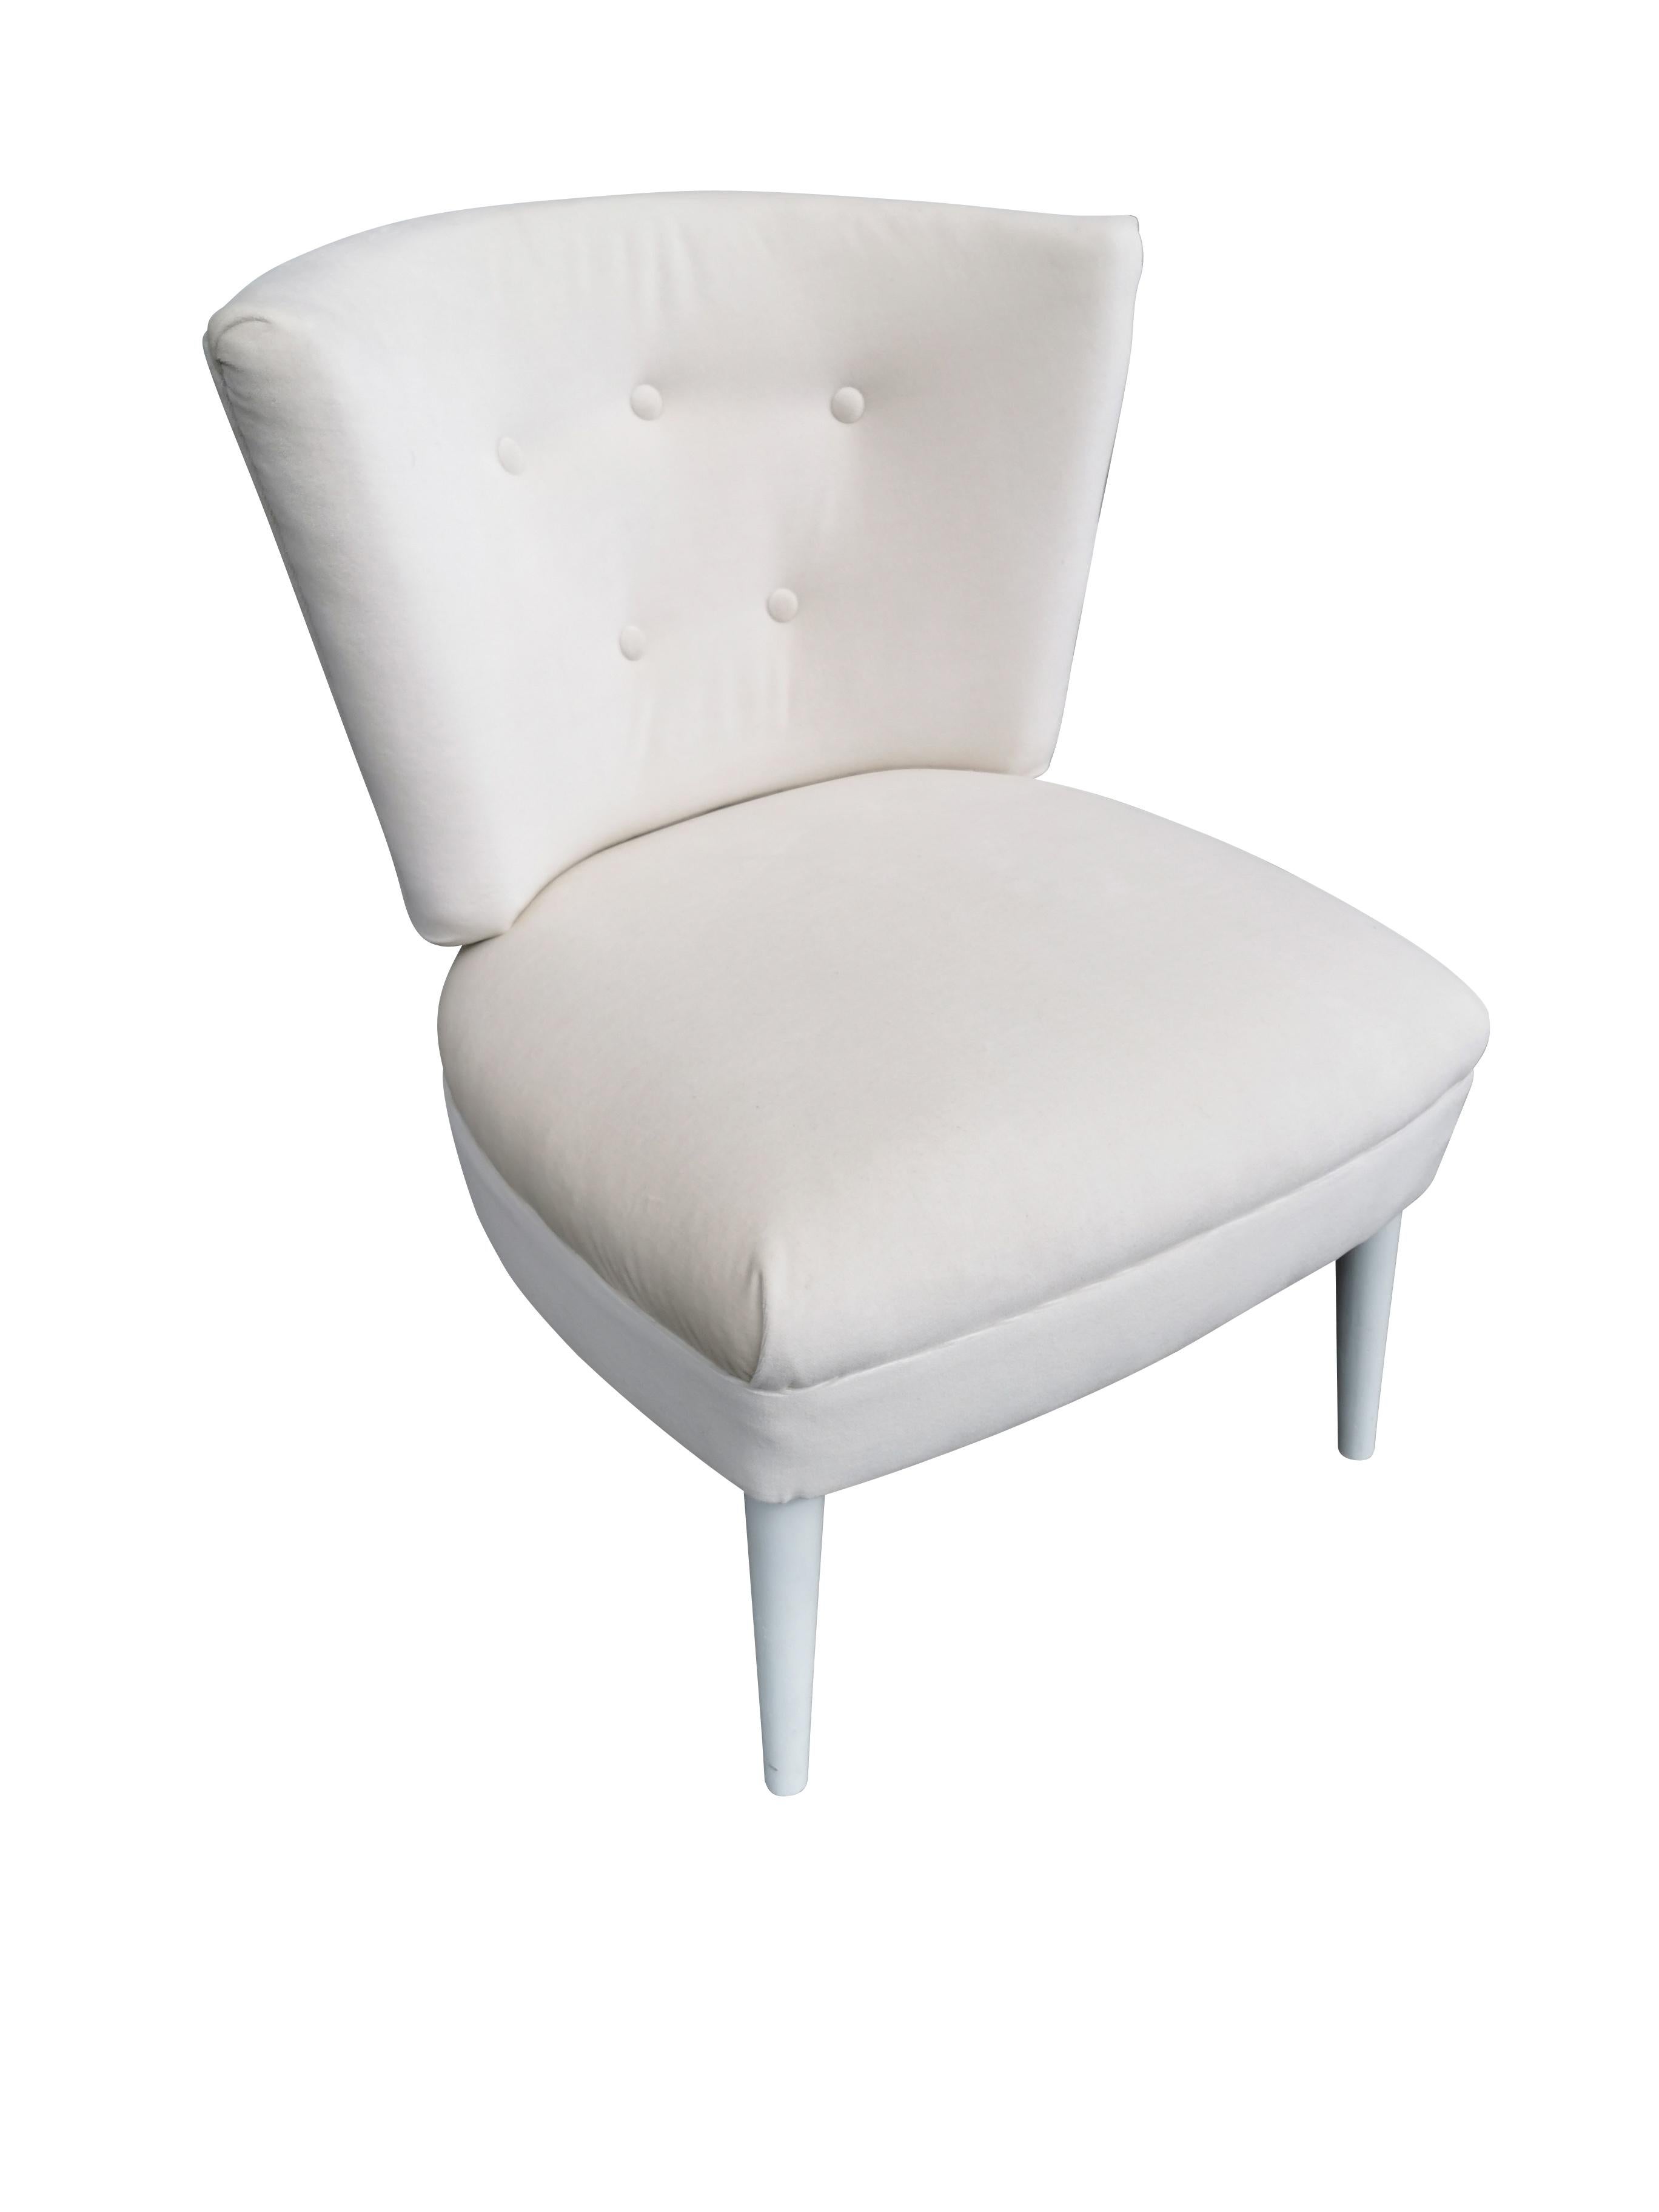 Other Hollywood Regency-Style Slipper Chair